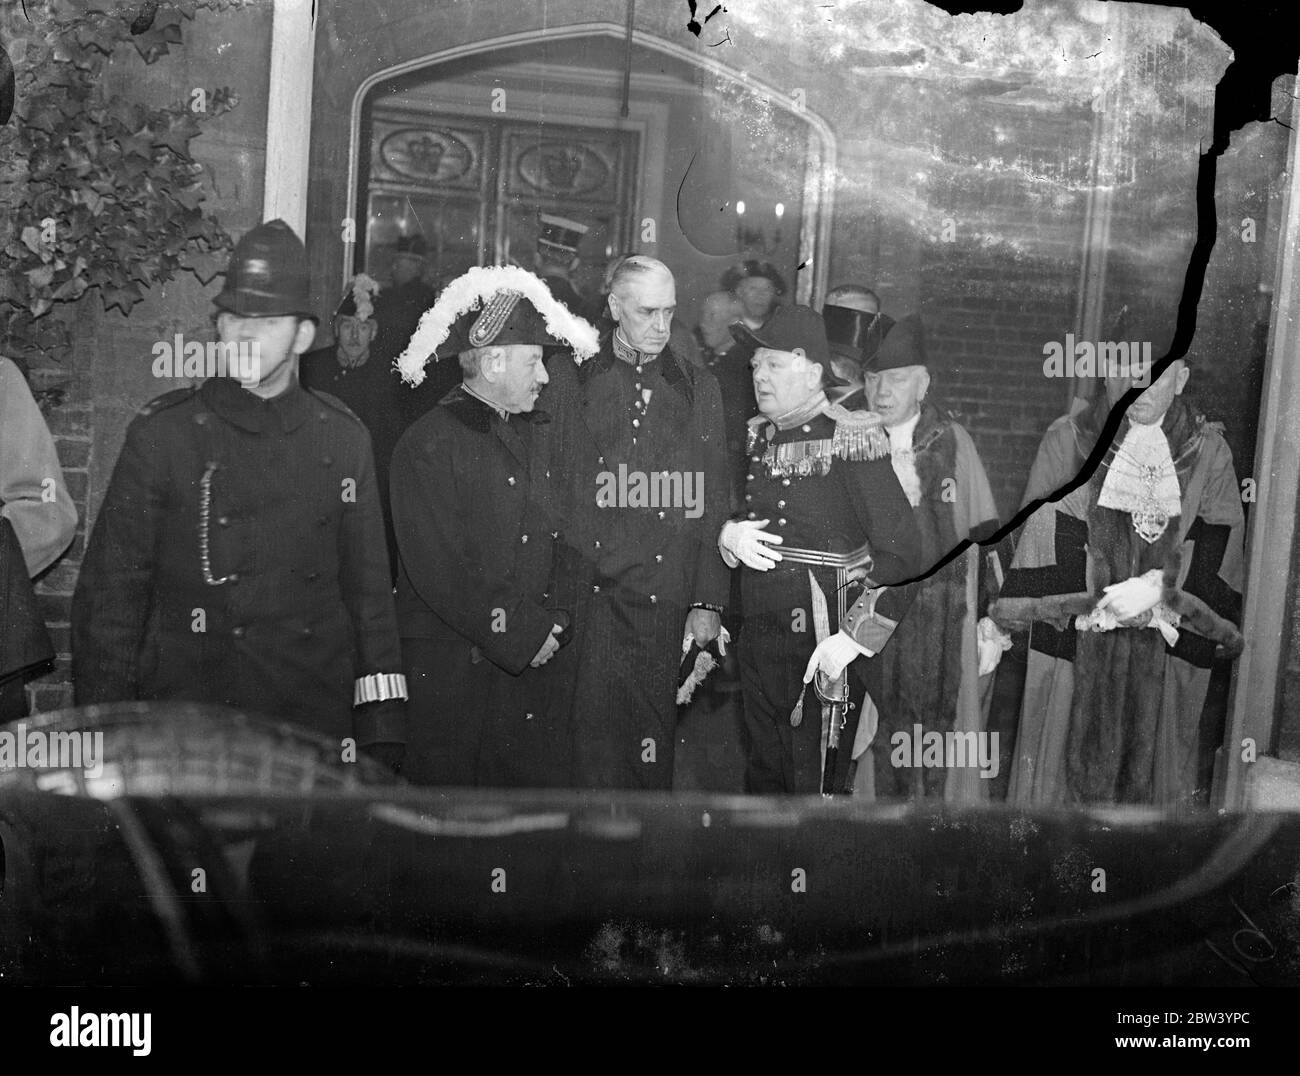 Sir Herbert Samuel and Mr Winston Churchill at St James's Palace - new King takes oath. Photo shows: (left to right) Sir Herbert Samuel, Major Fitzroy, speaker of the House of Commons, and Mr Winston Churchill chatting as they left St James's Palace after King George VI has been sworn in before the Accession Council 12 December 1936 Stock Photo